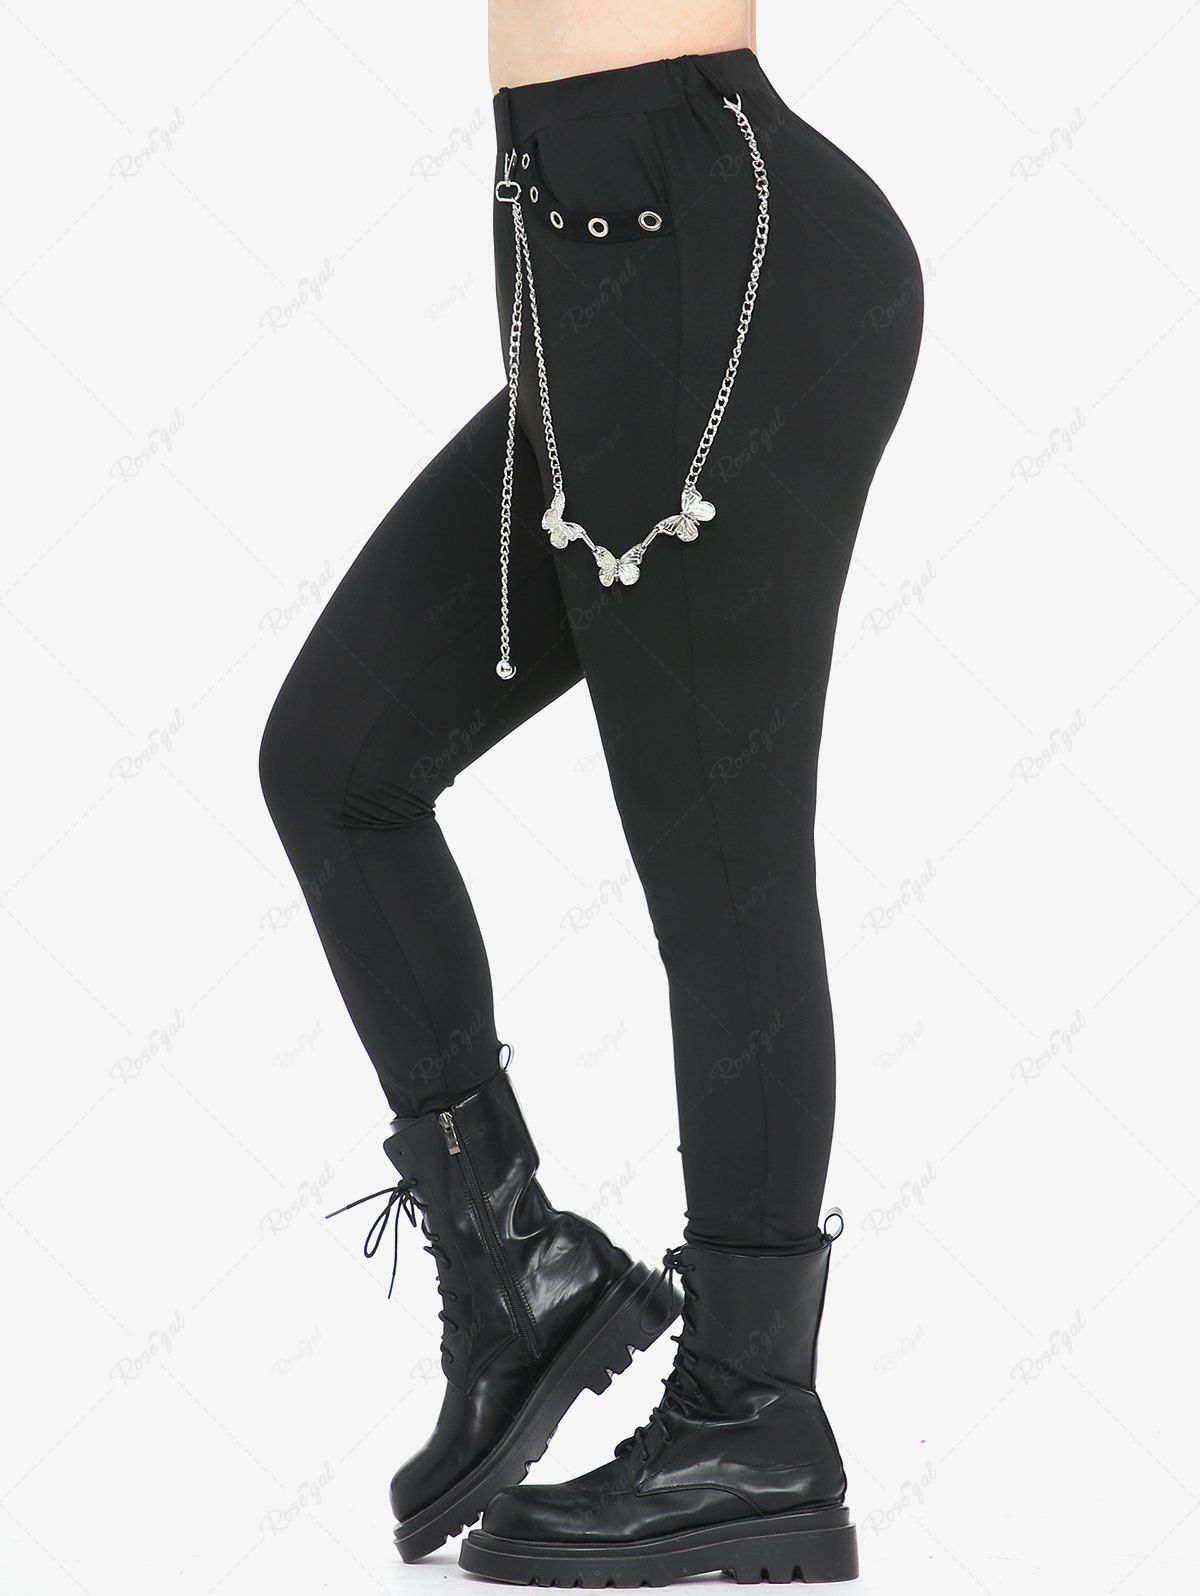 Plus Size Pockets Grommets Butterfly Chains Leggings [48% OFF